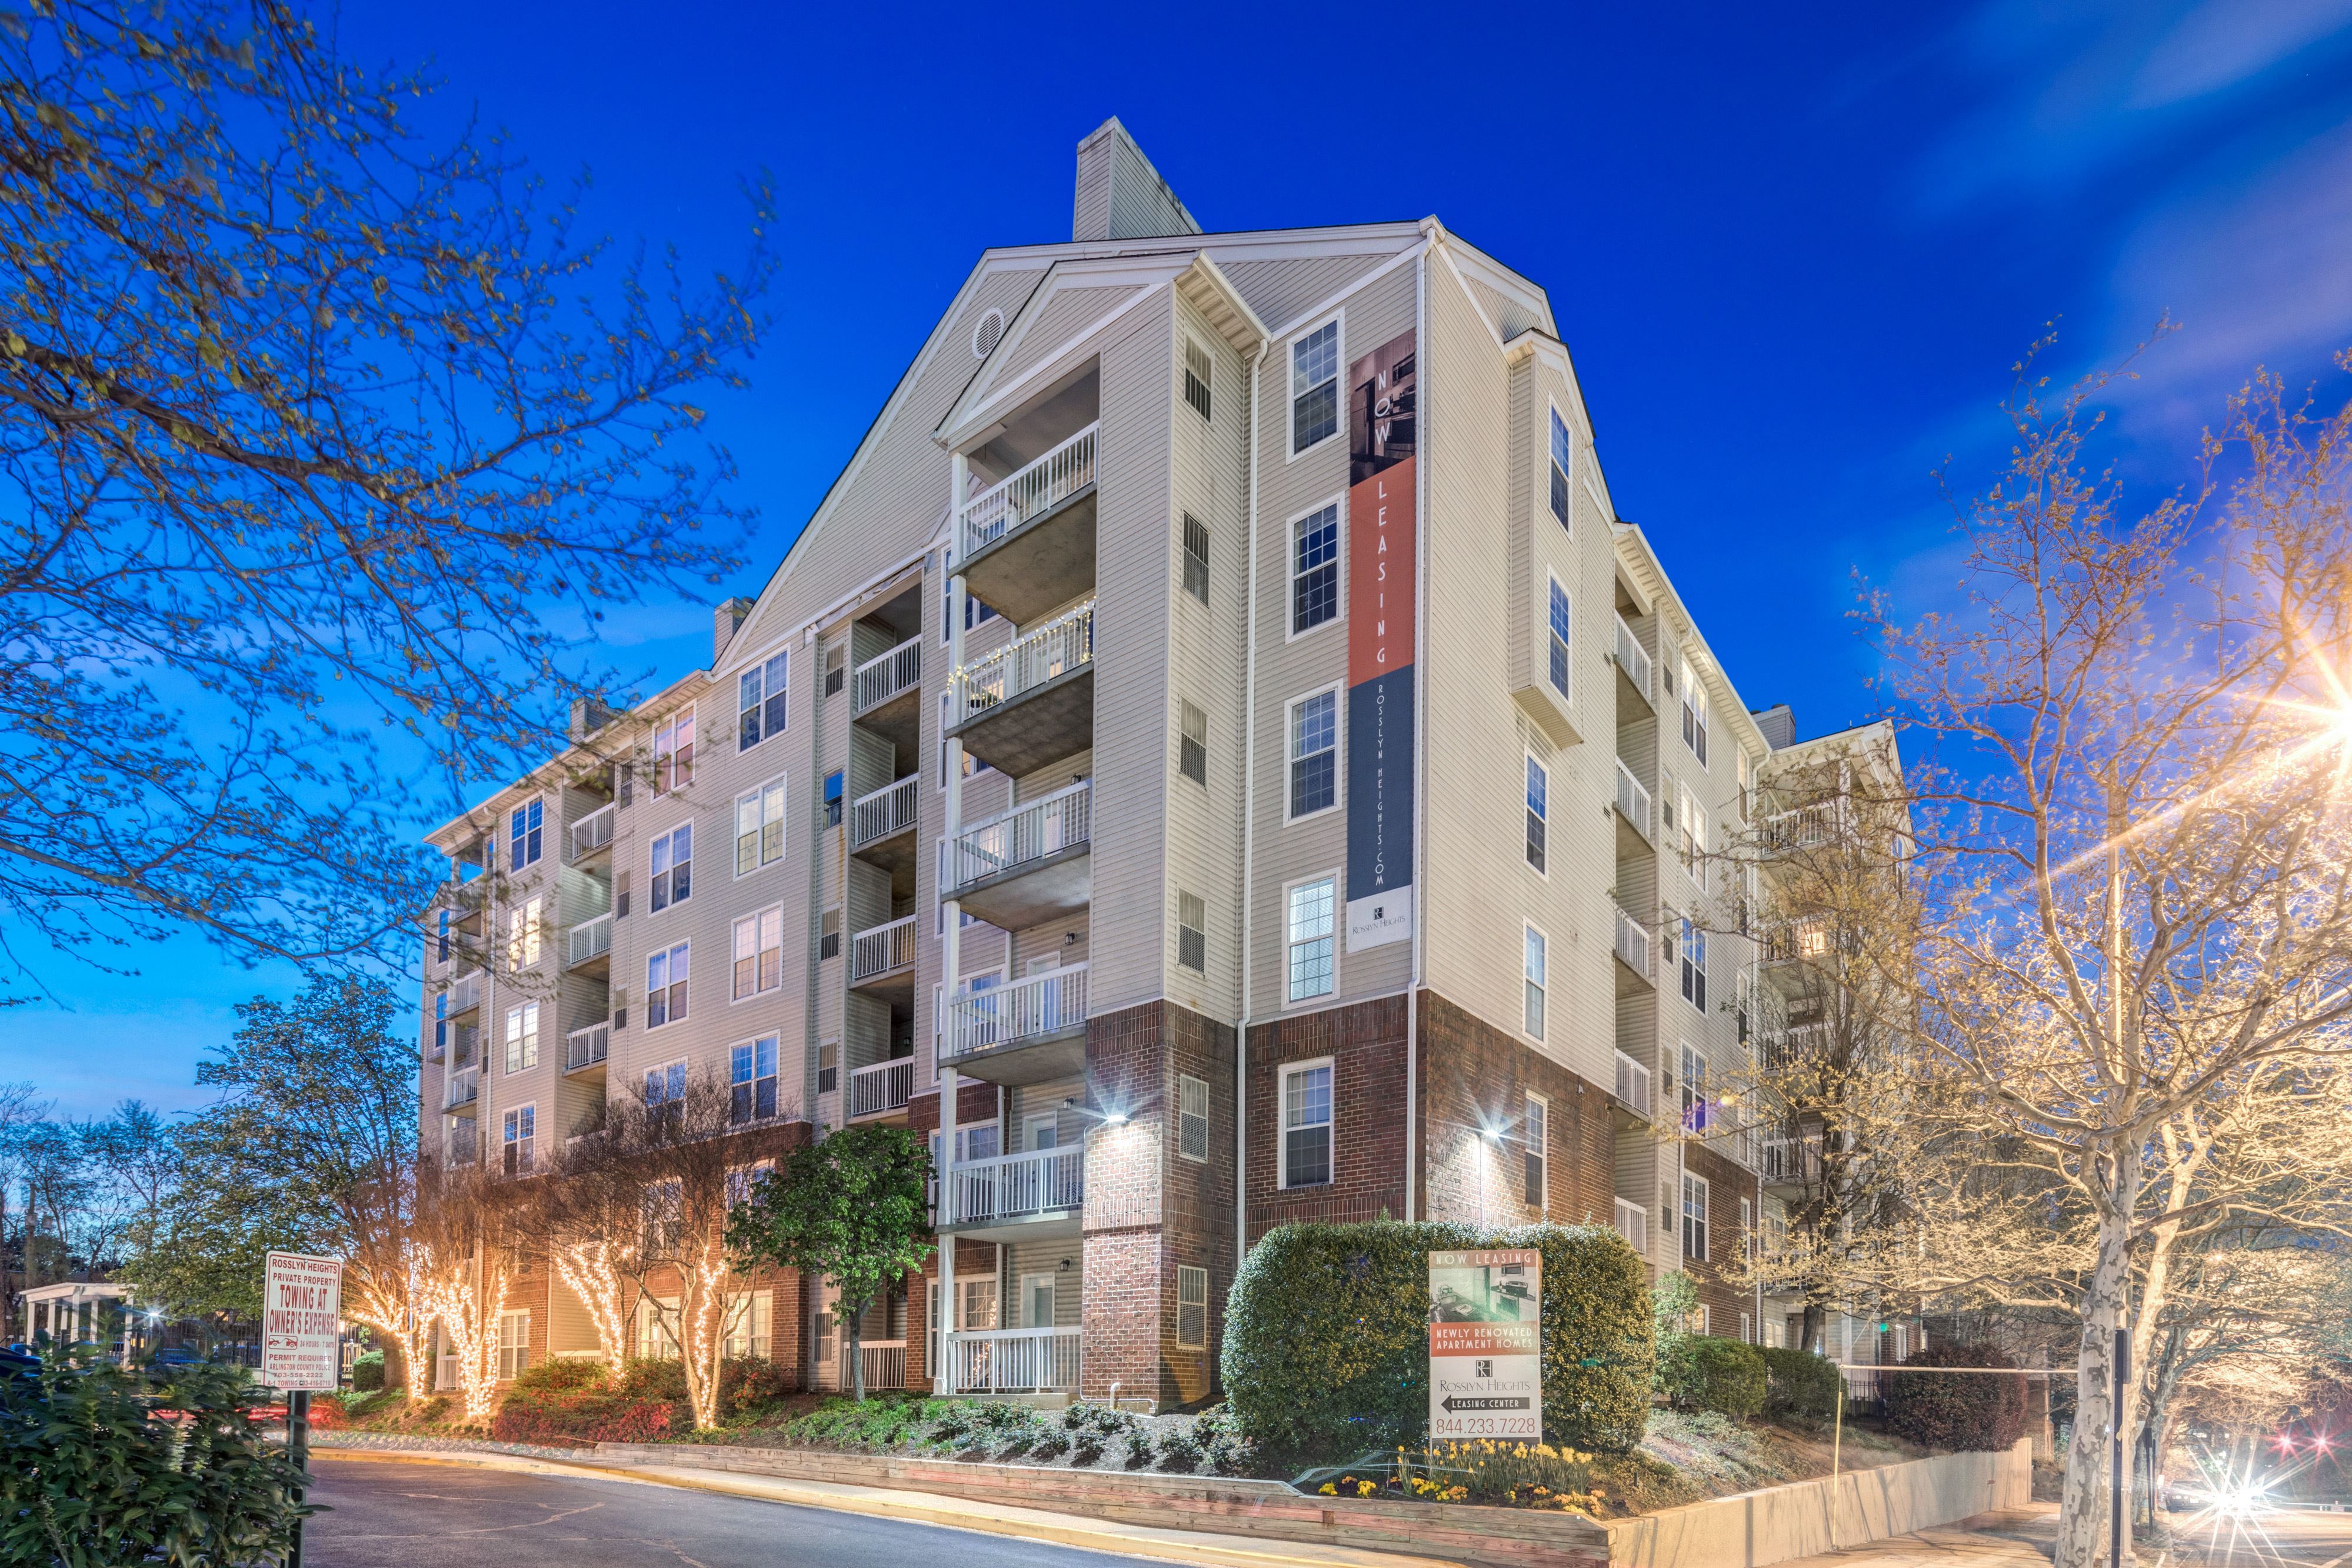 Controlled Access Community in the Heart of Rosslyn, VA